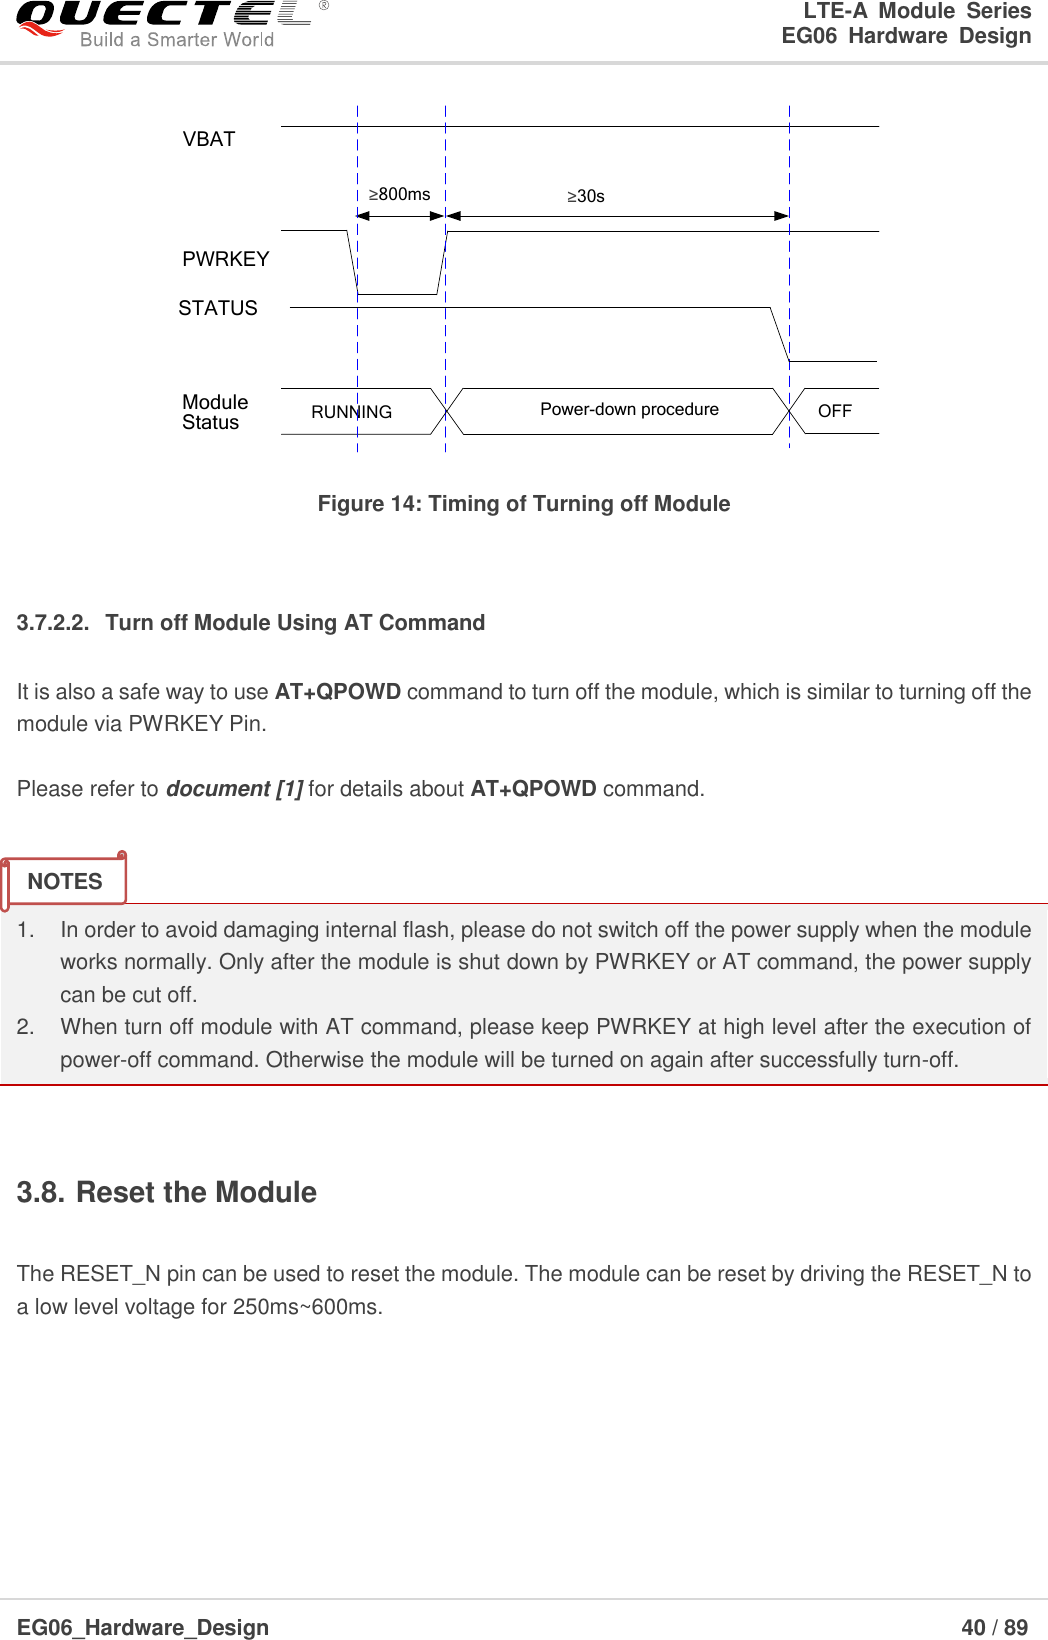 LTE-A  Module  Series                                                  EG06  Hardware  Design  EG06_Hardware_Design                                                               40 / 89    VBATPWRKEY≥800msRUNNING Power-down procedure OFFModuleStatusSTATUS≥30s Figure 14: Timing of Turning off Module  3.7.2.2.  Turn off Module Using AT Command It is also a safe way to use AT+QPOWD command to turn off the module, which is similar to turning off the module via PWRKEY Pin.  Please refer to document [1] for details about AT+QPOWD command.   1. In order to avoid damaging internal flash, please do not switch off the power supply when the module works normally. Only after the module is shut down by PWRKEY or AT command, the power supply can be cut off. 2.  When turn off module with AT command, please keep PWRKEY at high level after the execution of power-off command. Otherwise the module will be turned on again after successfully turn-off.  3.8. Reset the Module  The RESET_N pin can be used to reset the module. The module can be reset by driving the RESET_N to a low level voltage for 250ms~600ms.     NOTES 